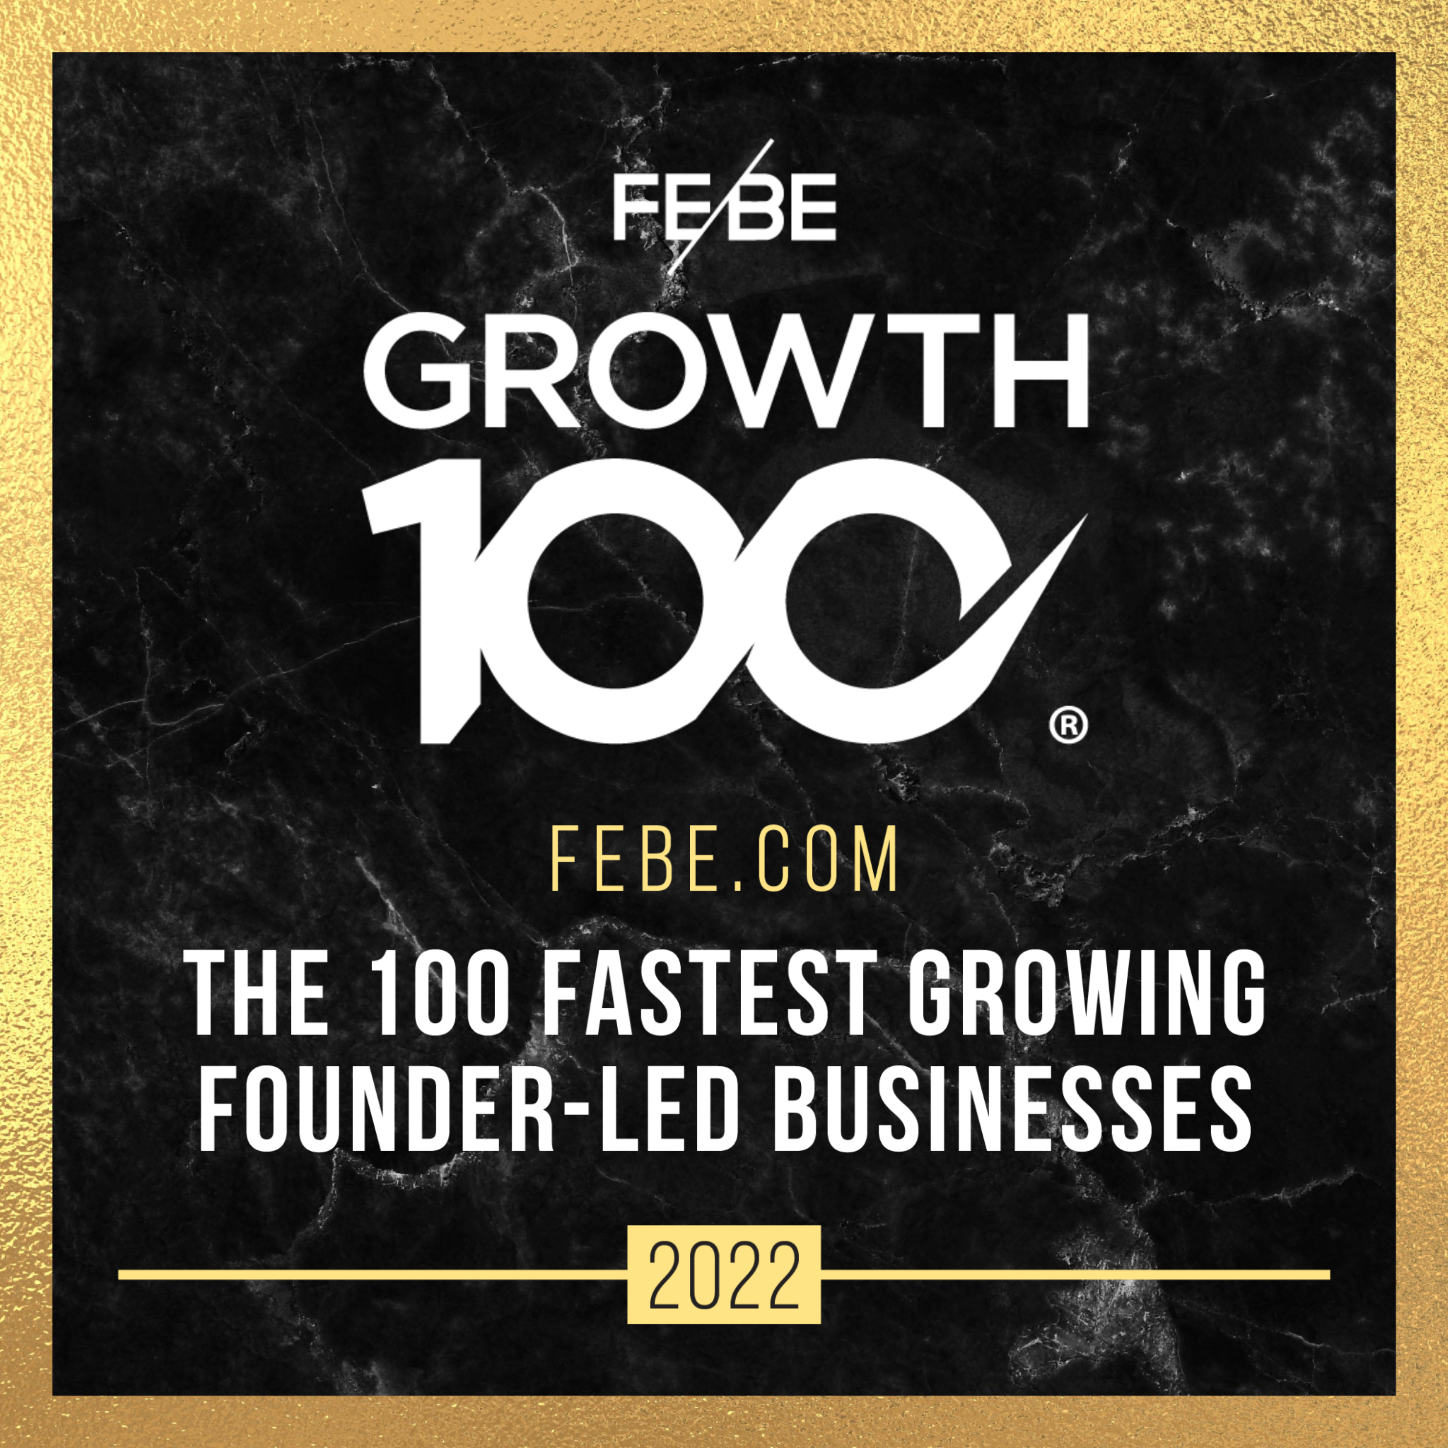 RouteNote reach the top 30 of the FEBE Growth 100 list of fastest growing UK companies